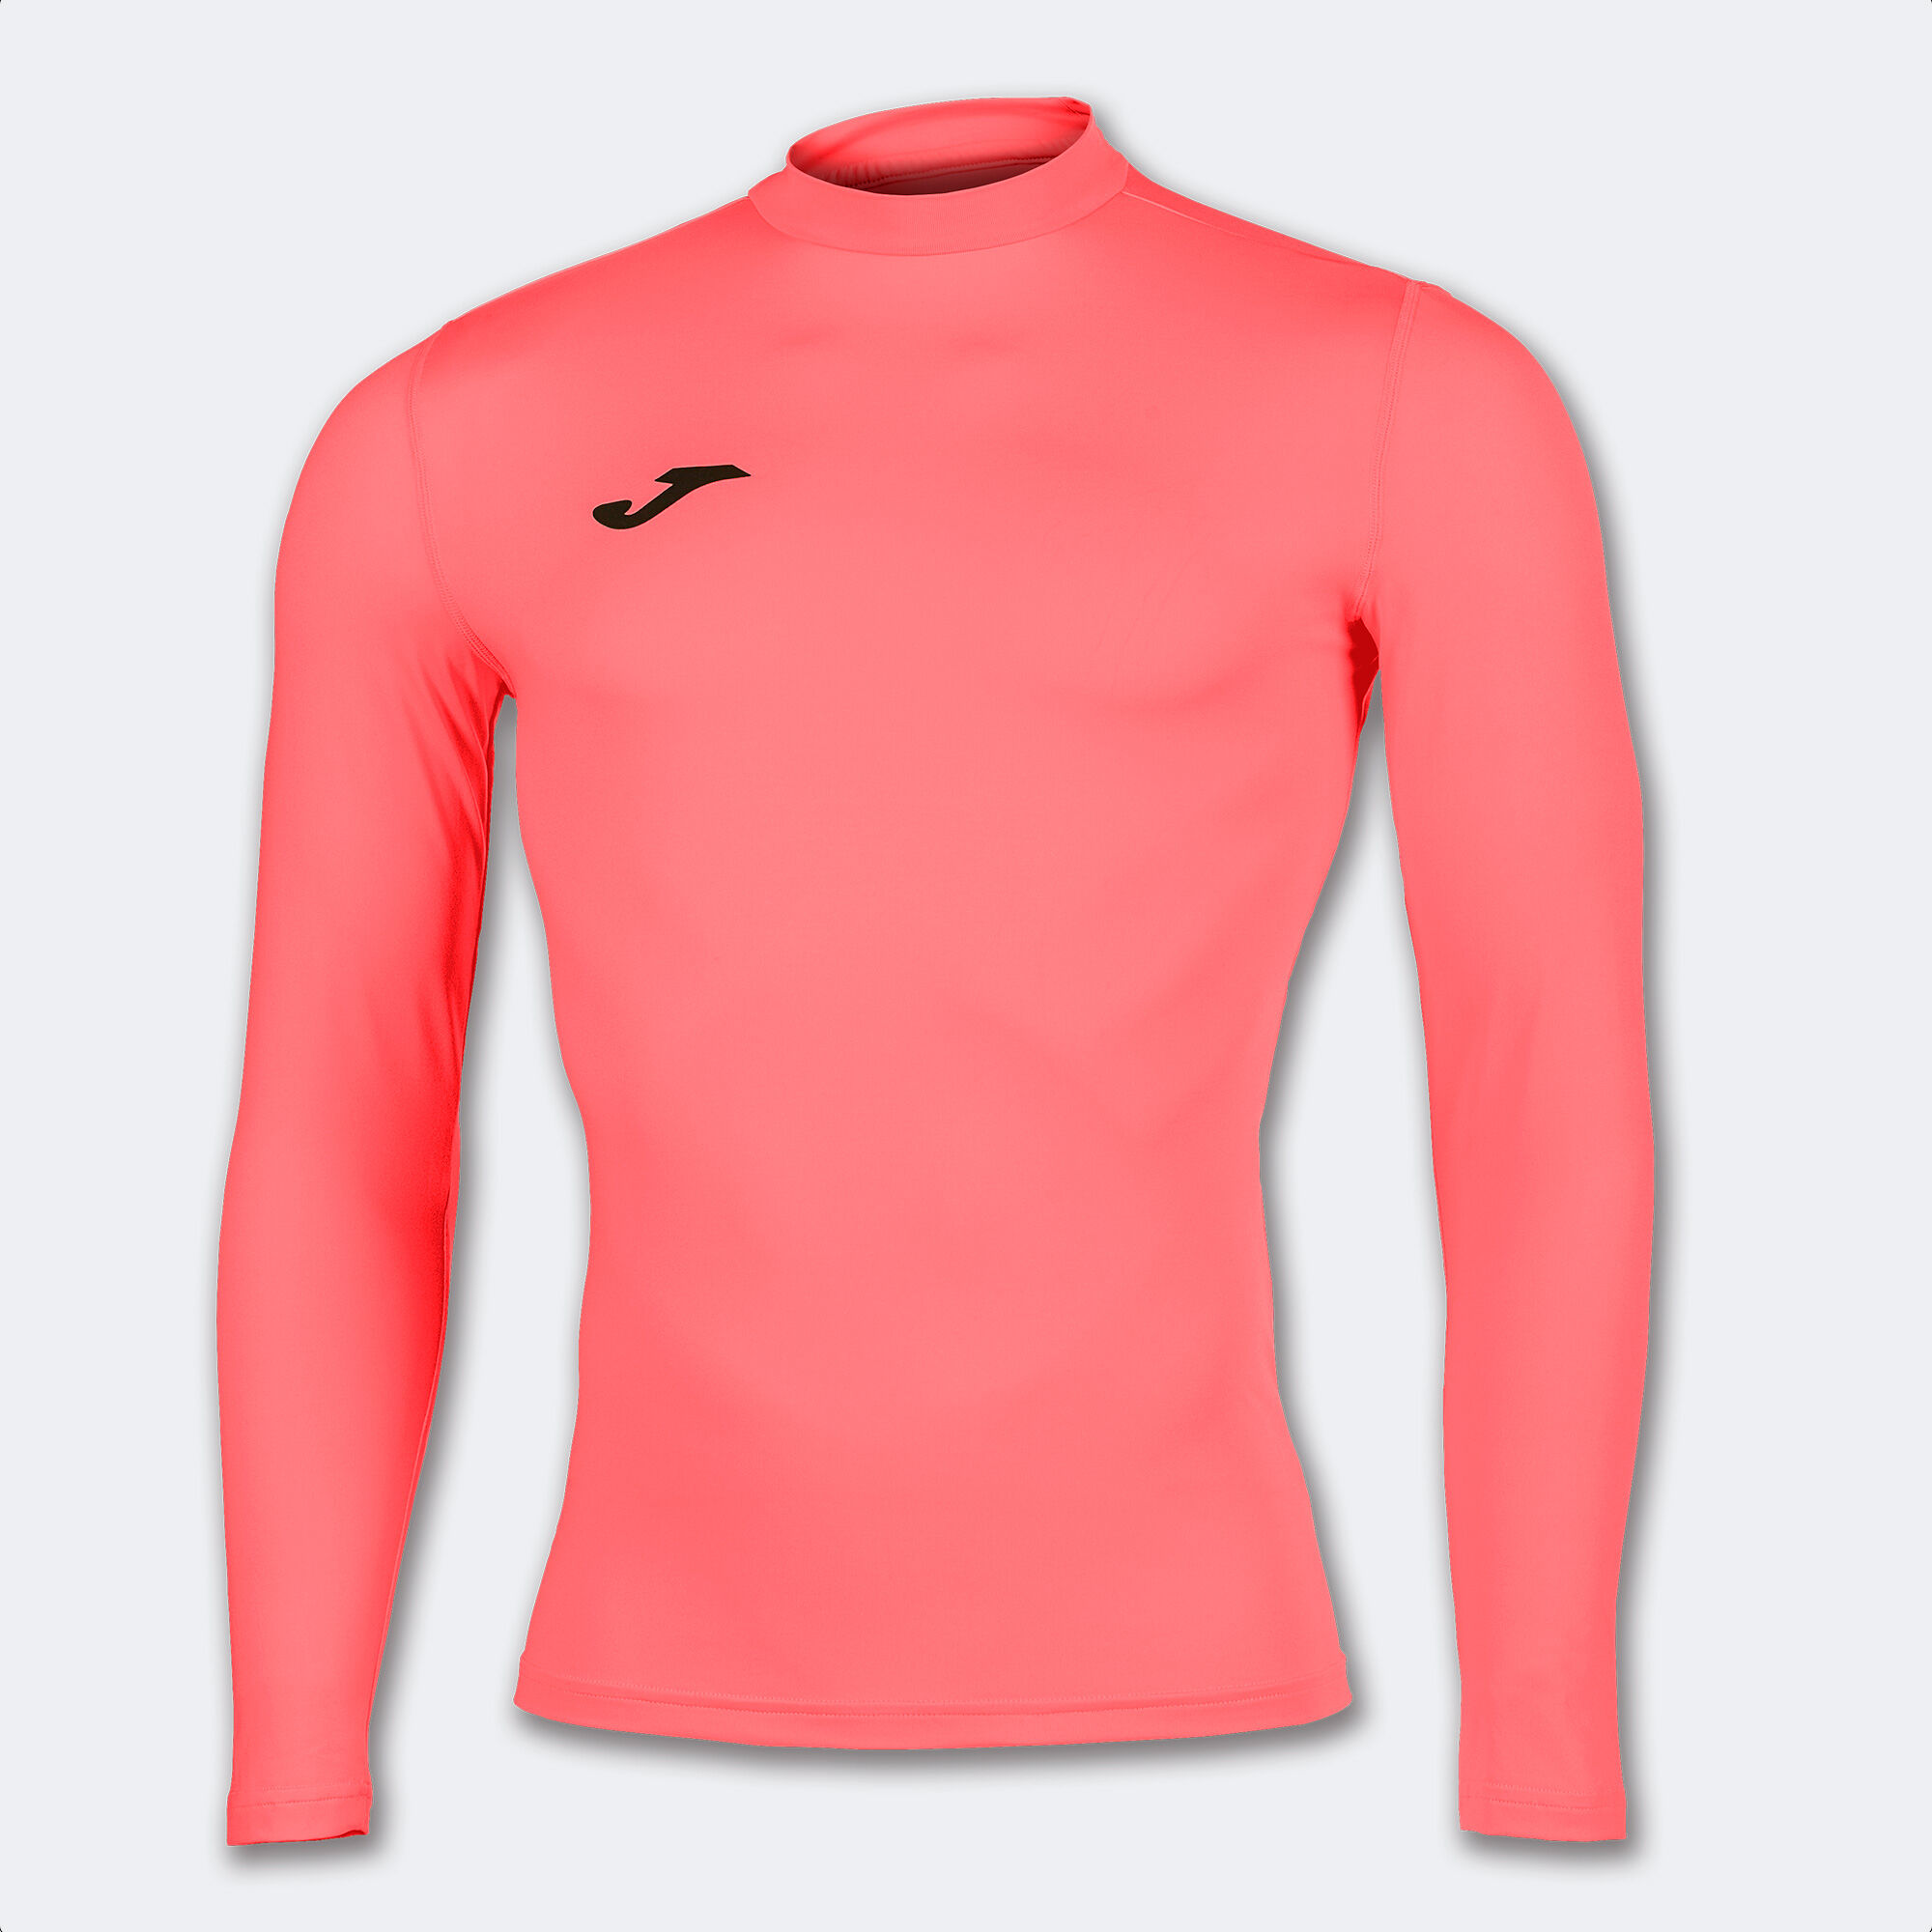 MAILLOT MANCHES LONGUES UNISEXE BRAMA ACADEMY CORAIL FLUO